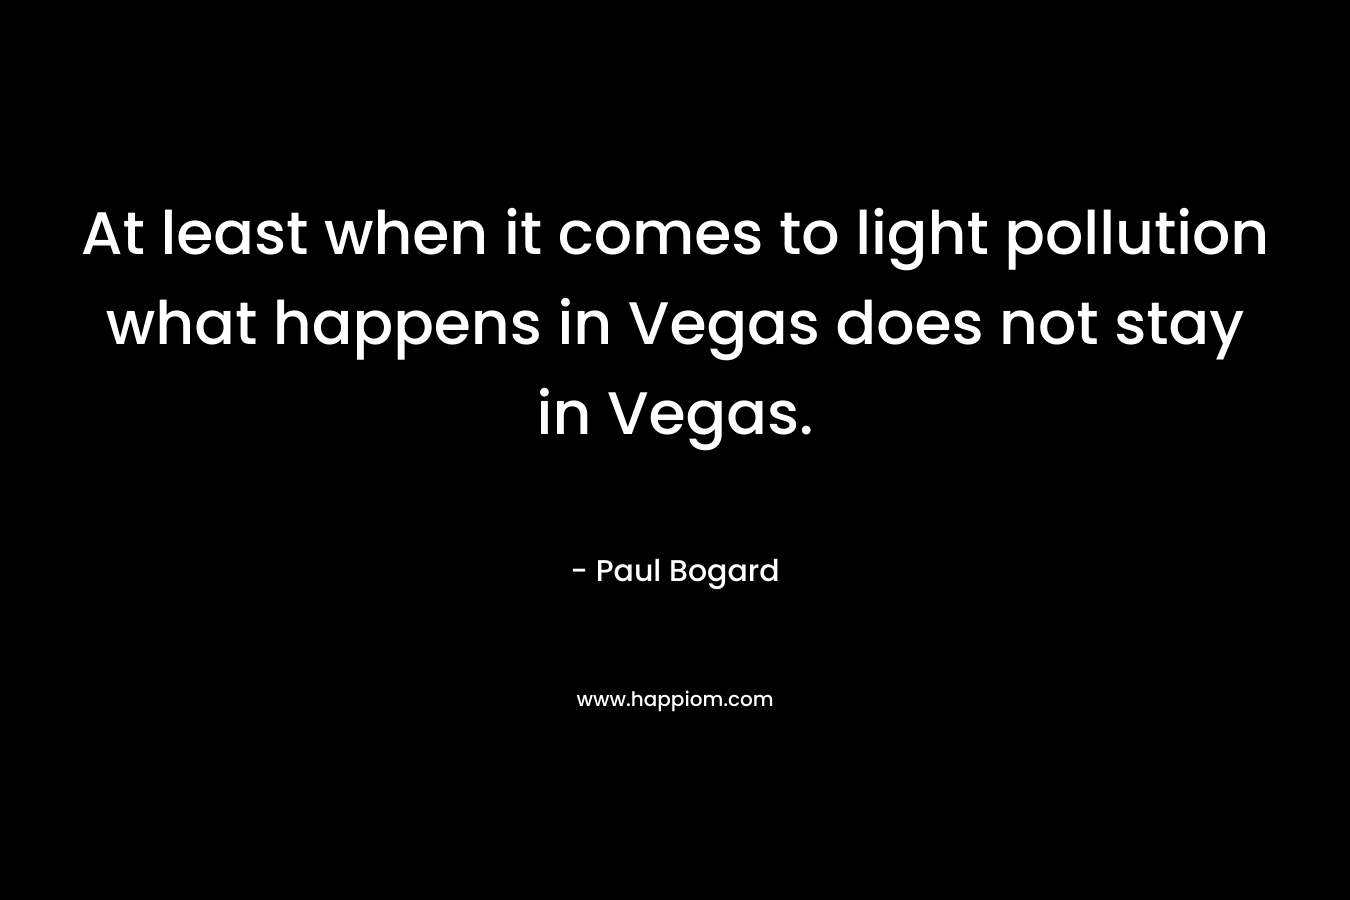 At least when it comes to light pollution what happens in Vegas does not stay in Vegas. – Paul Bogard